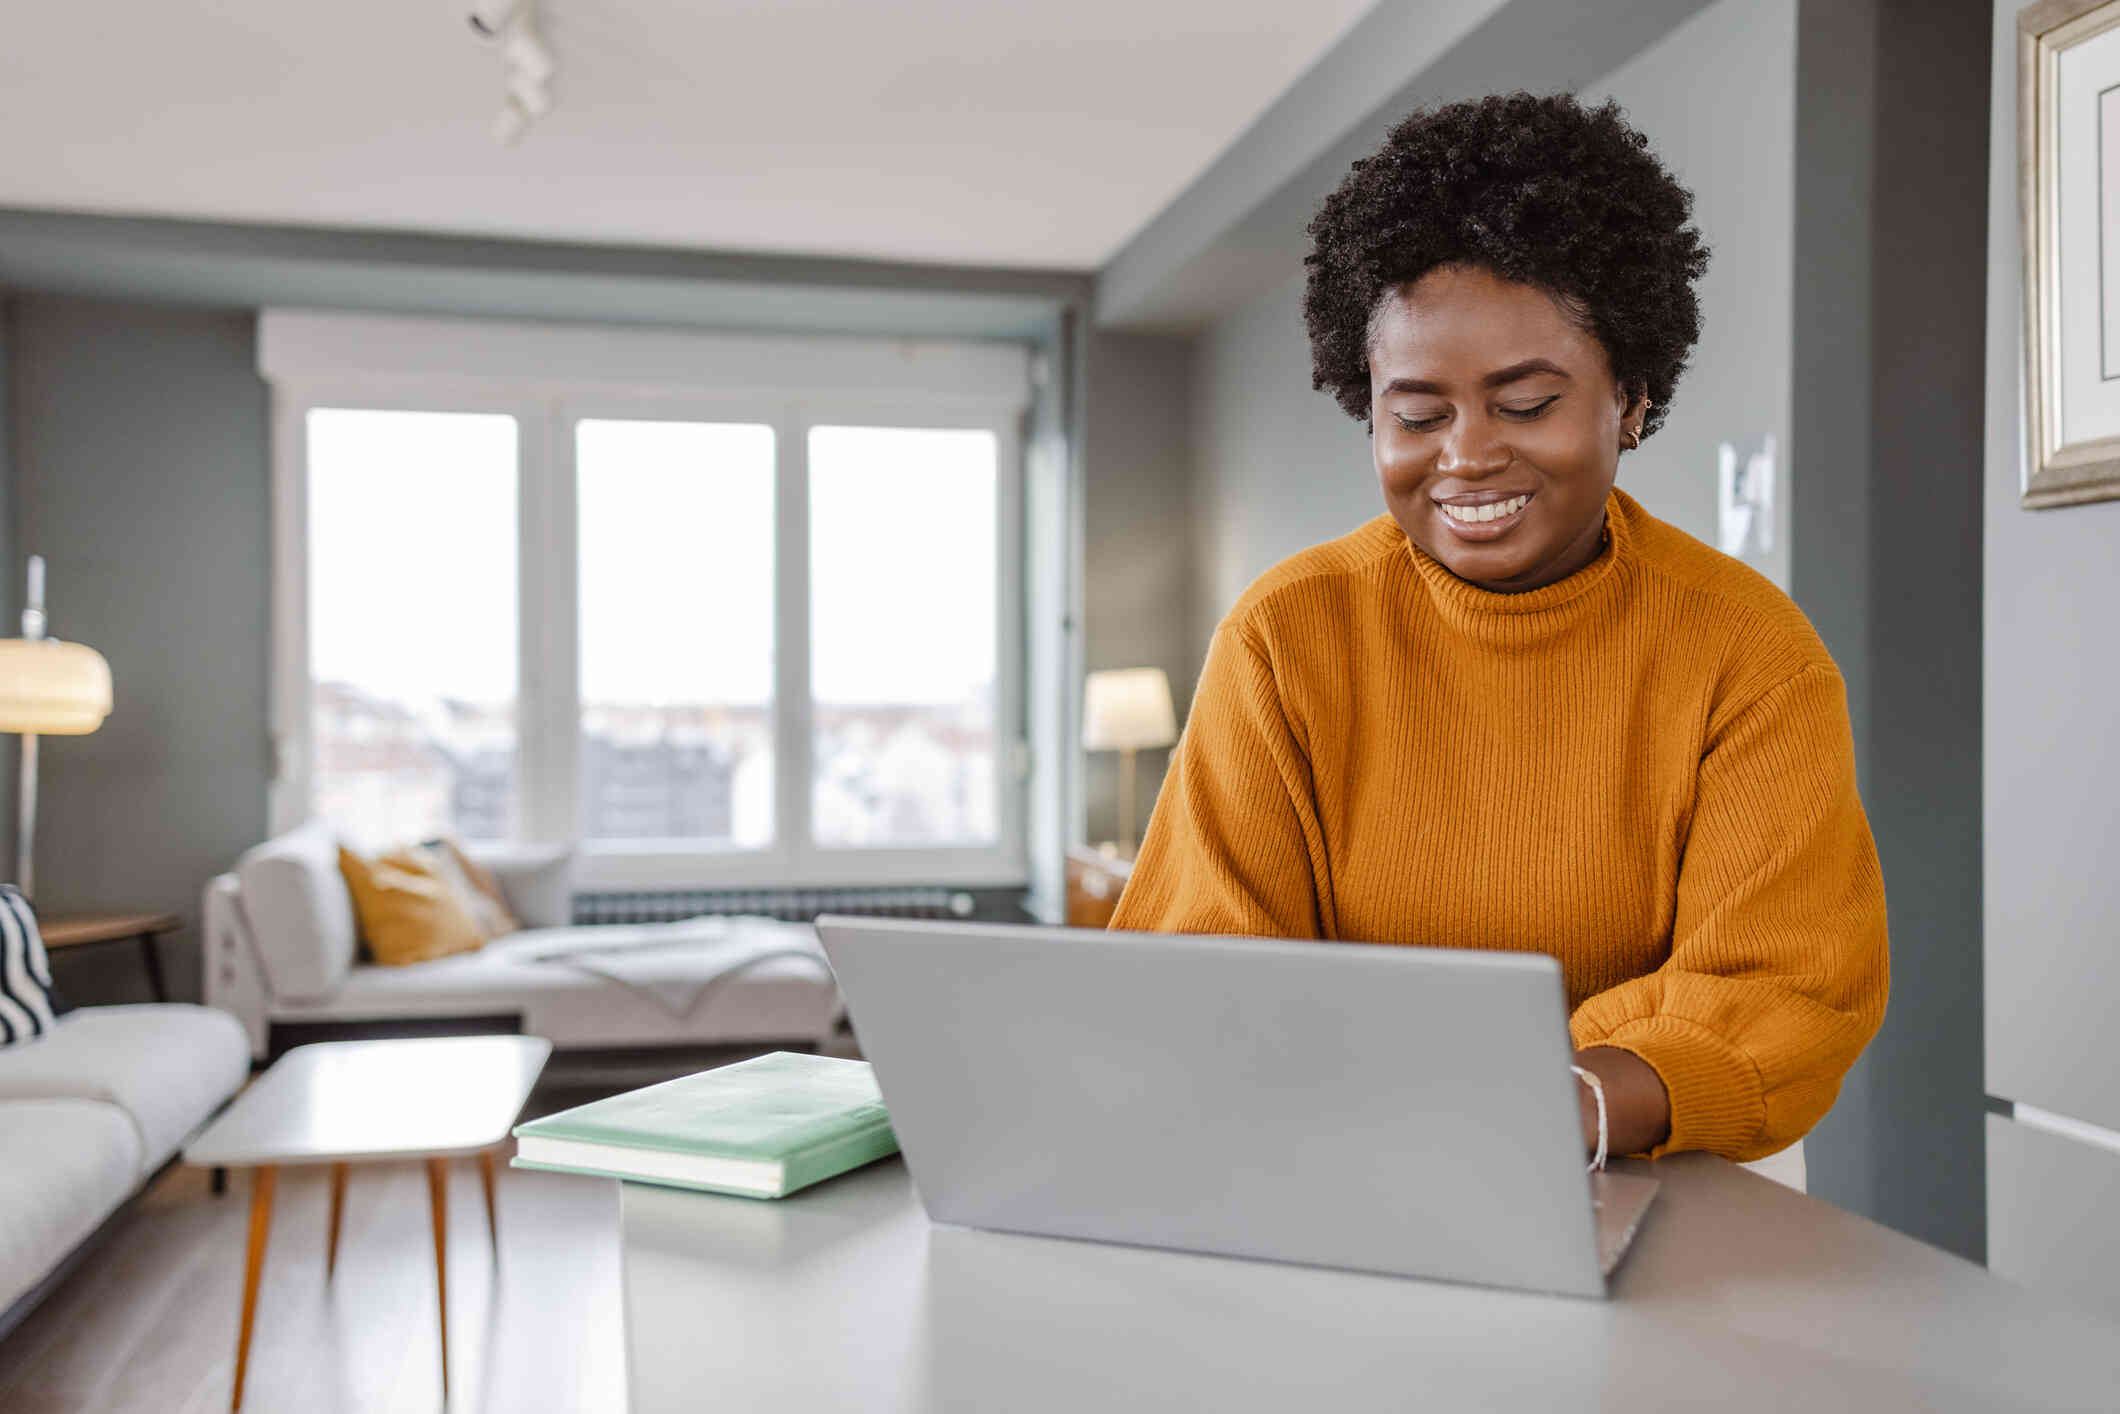 A woman in an orange sweater smiles at the laptop open on the table infront of her with her planner sitting next to it.